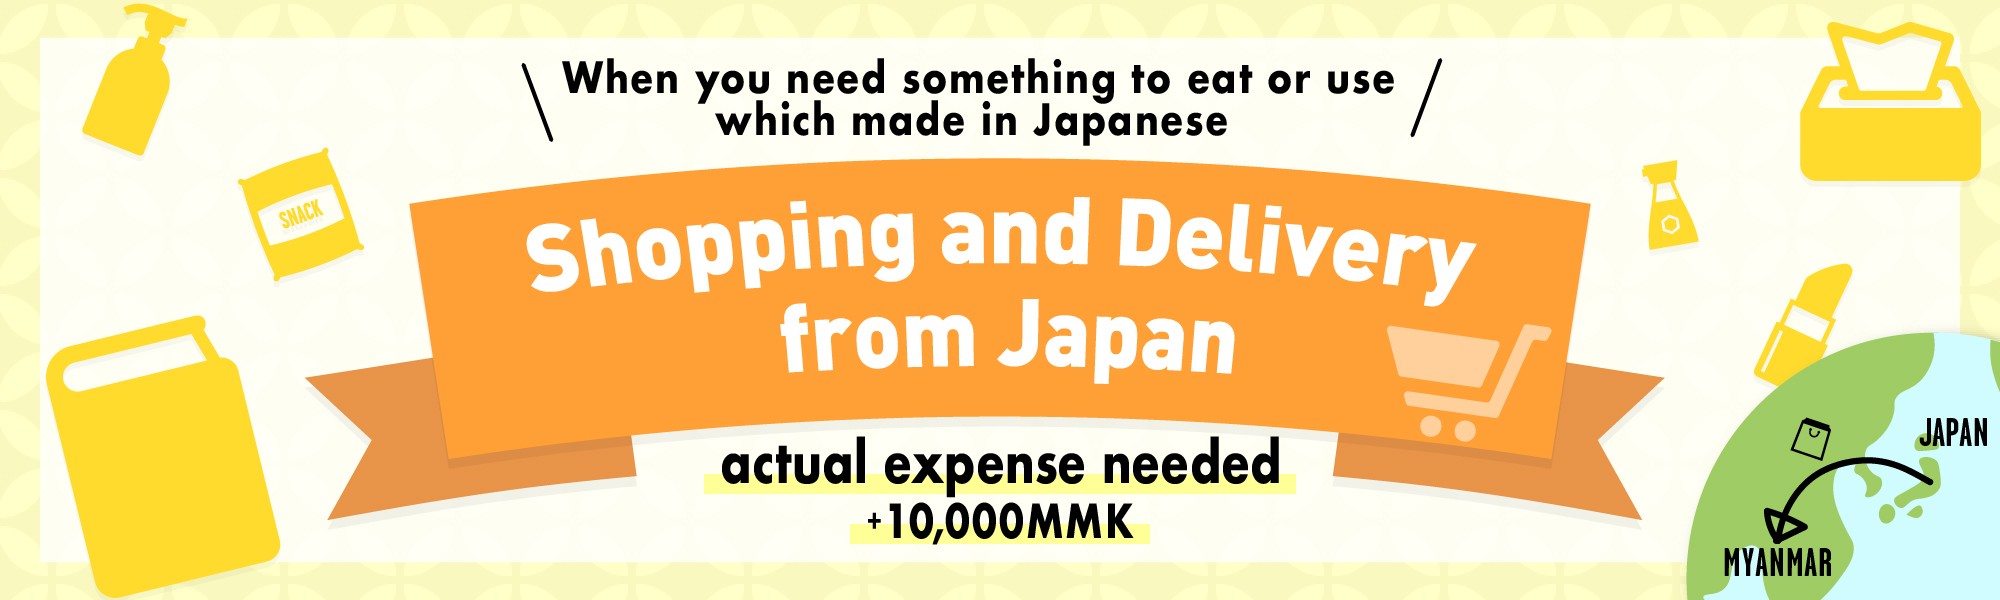 shopping and  delivery from Japan